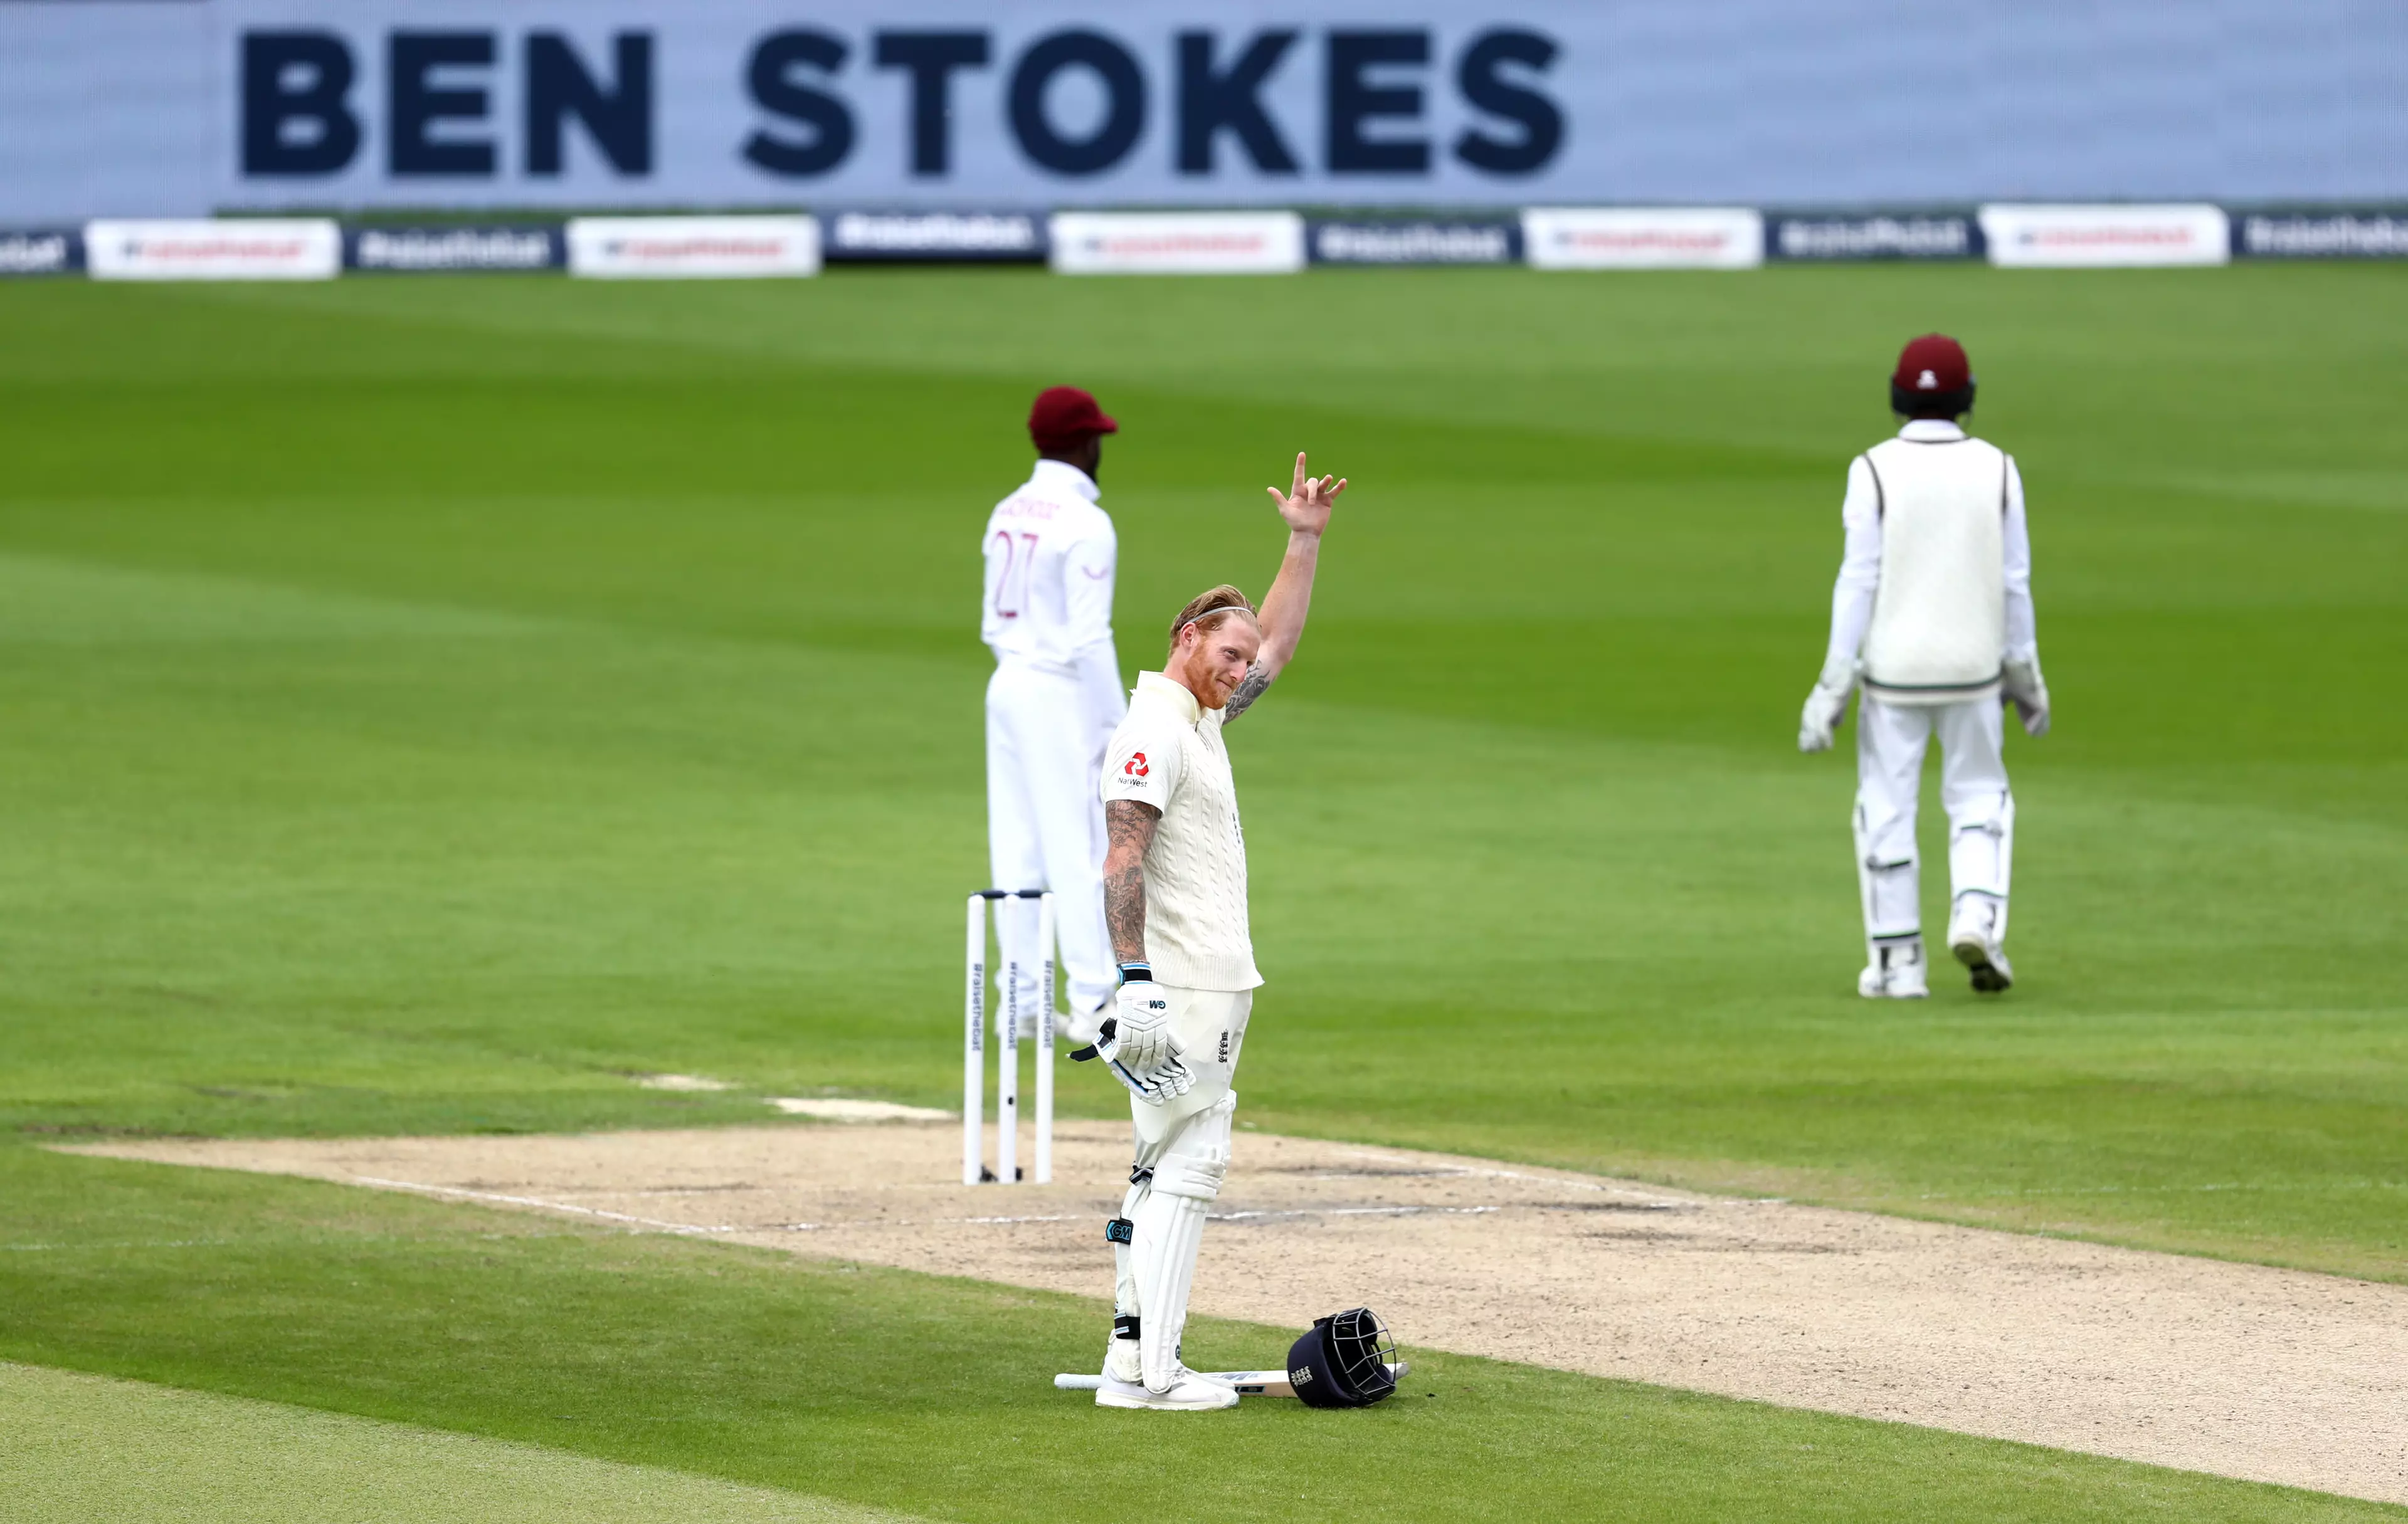 Stokes celebrates a century against West Indies. Image: PA Images